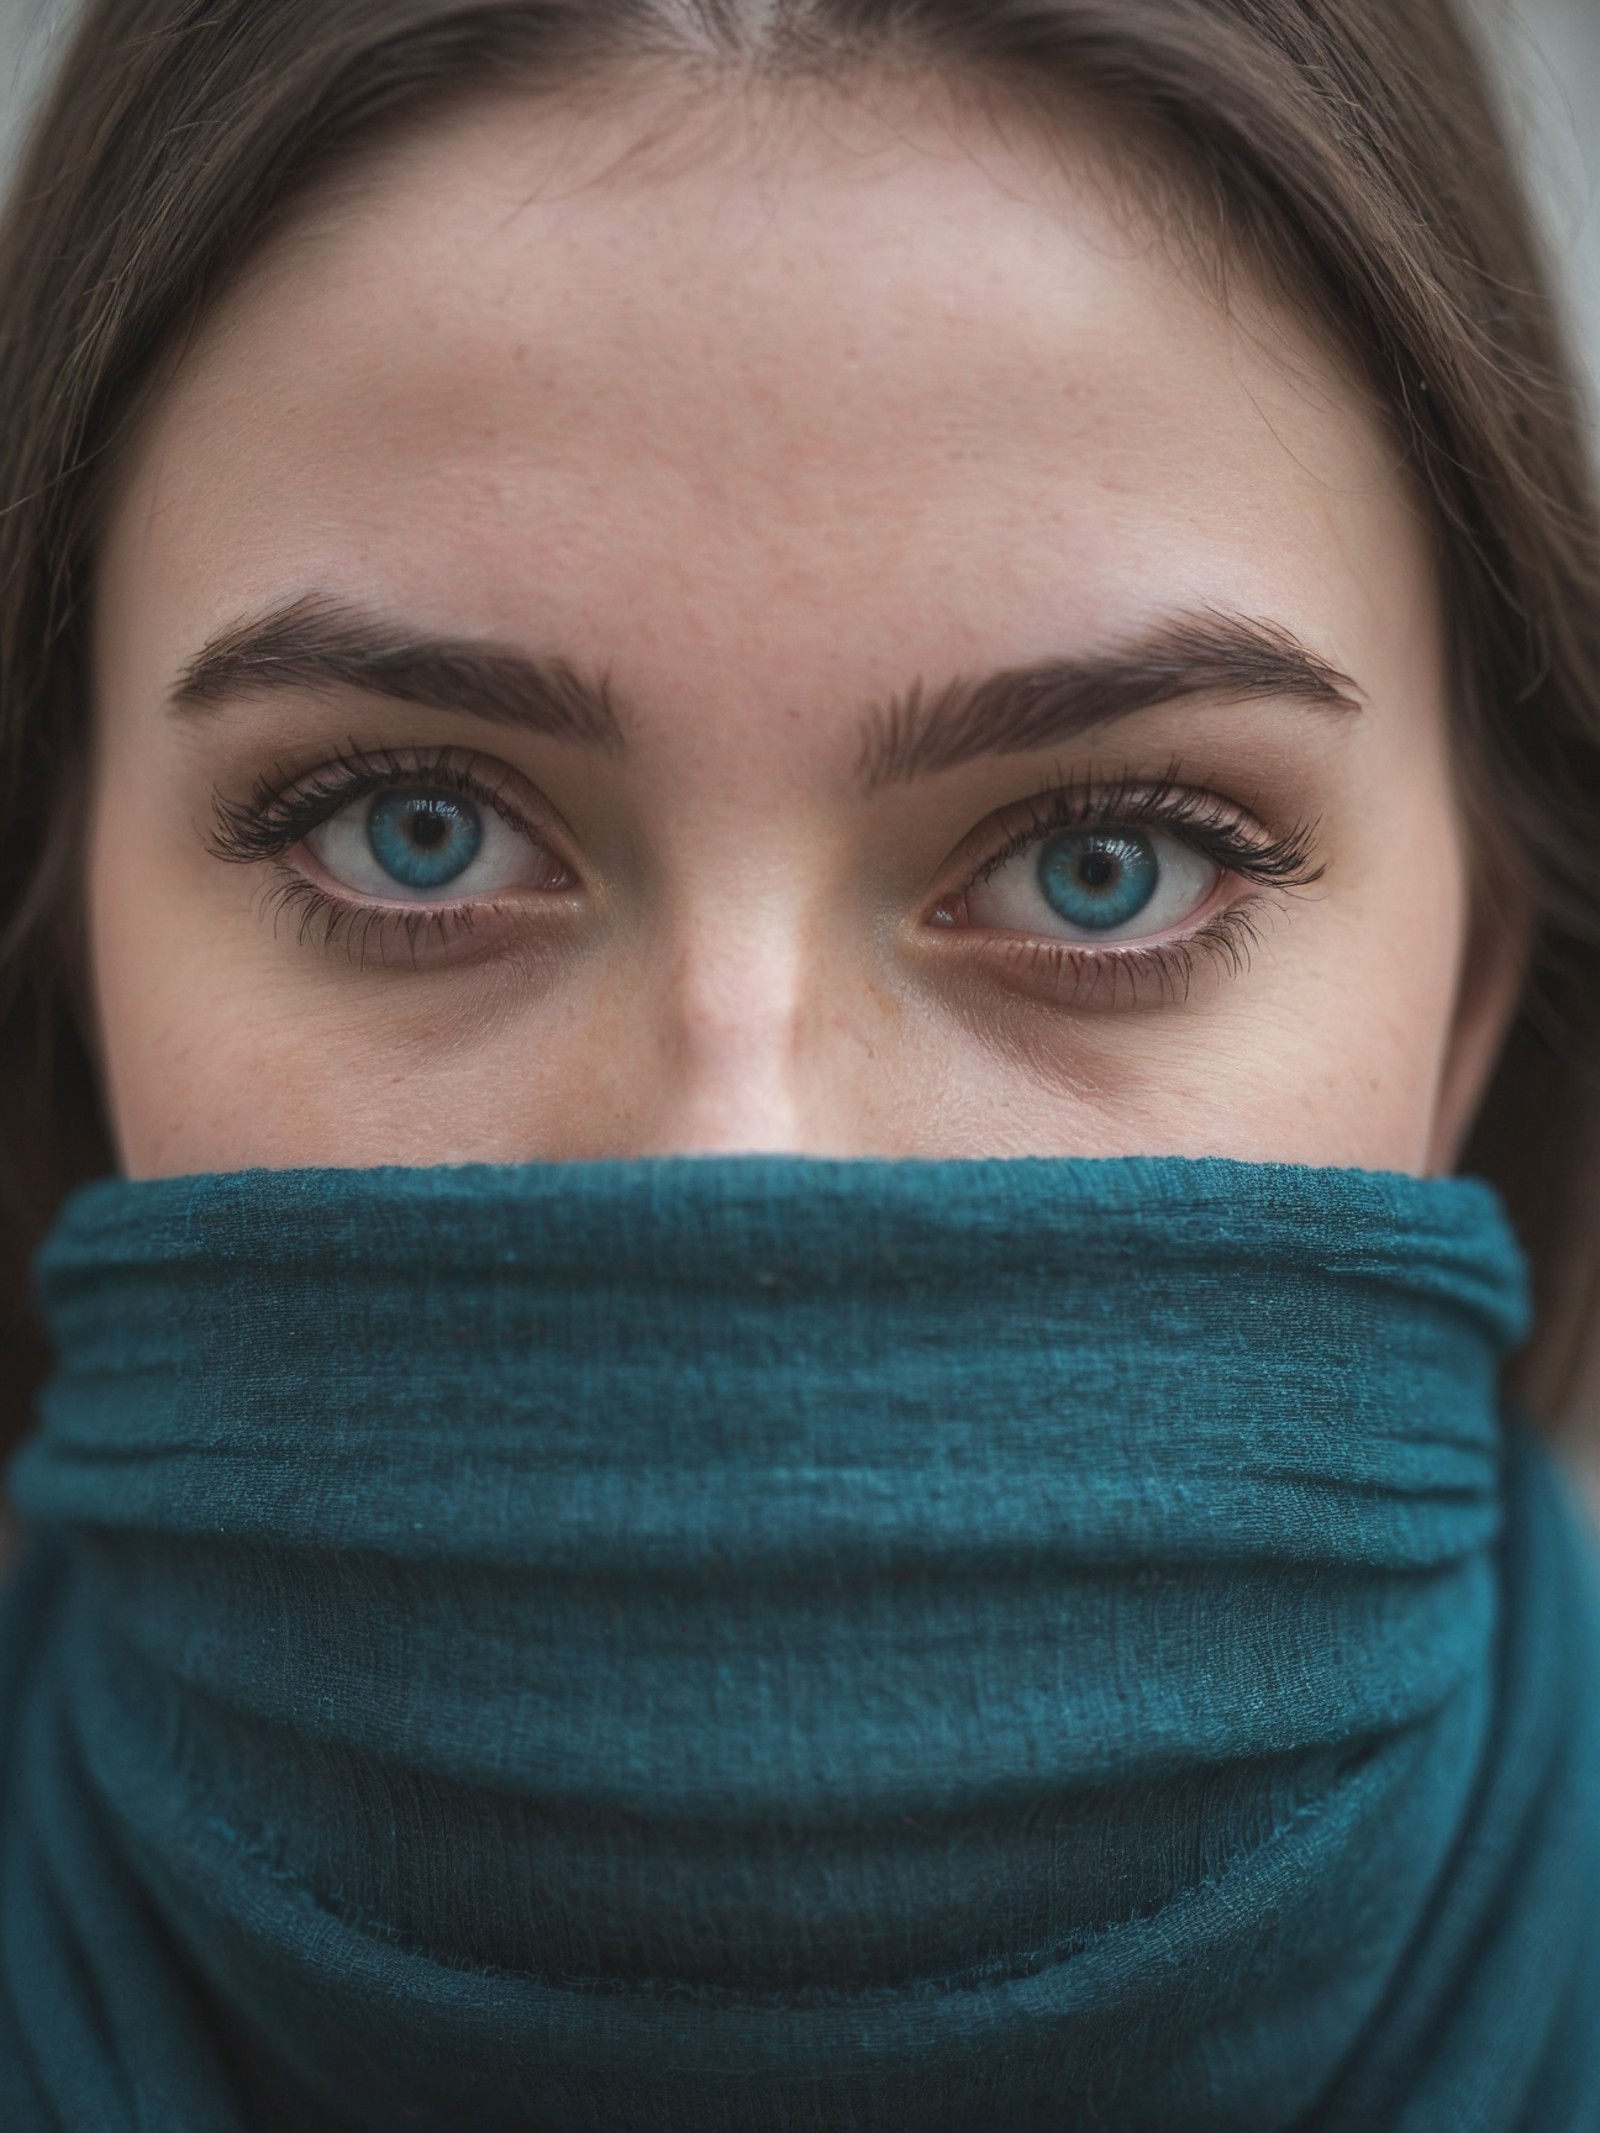 Close-up of a young woman's face partially obscured by a dark teal scarf, highlighting her striking blue eyes, long eyelas...